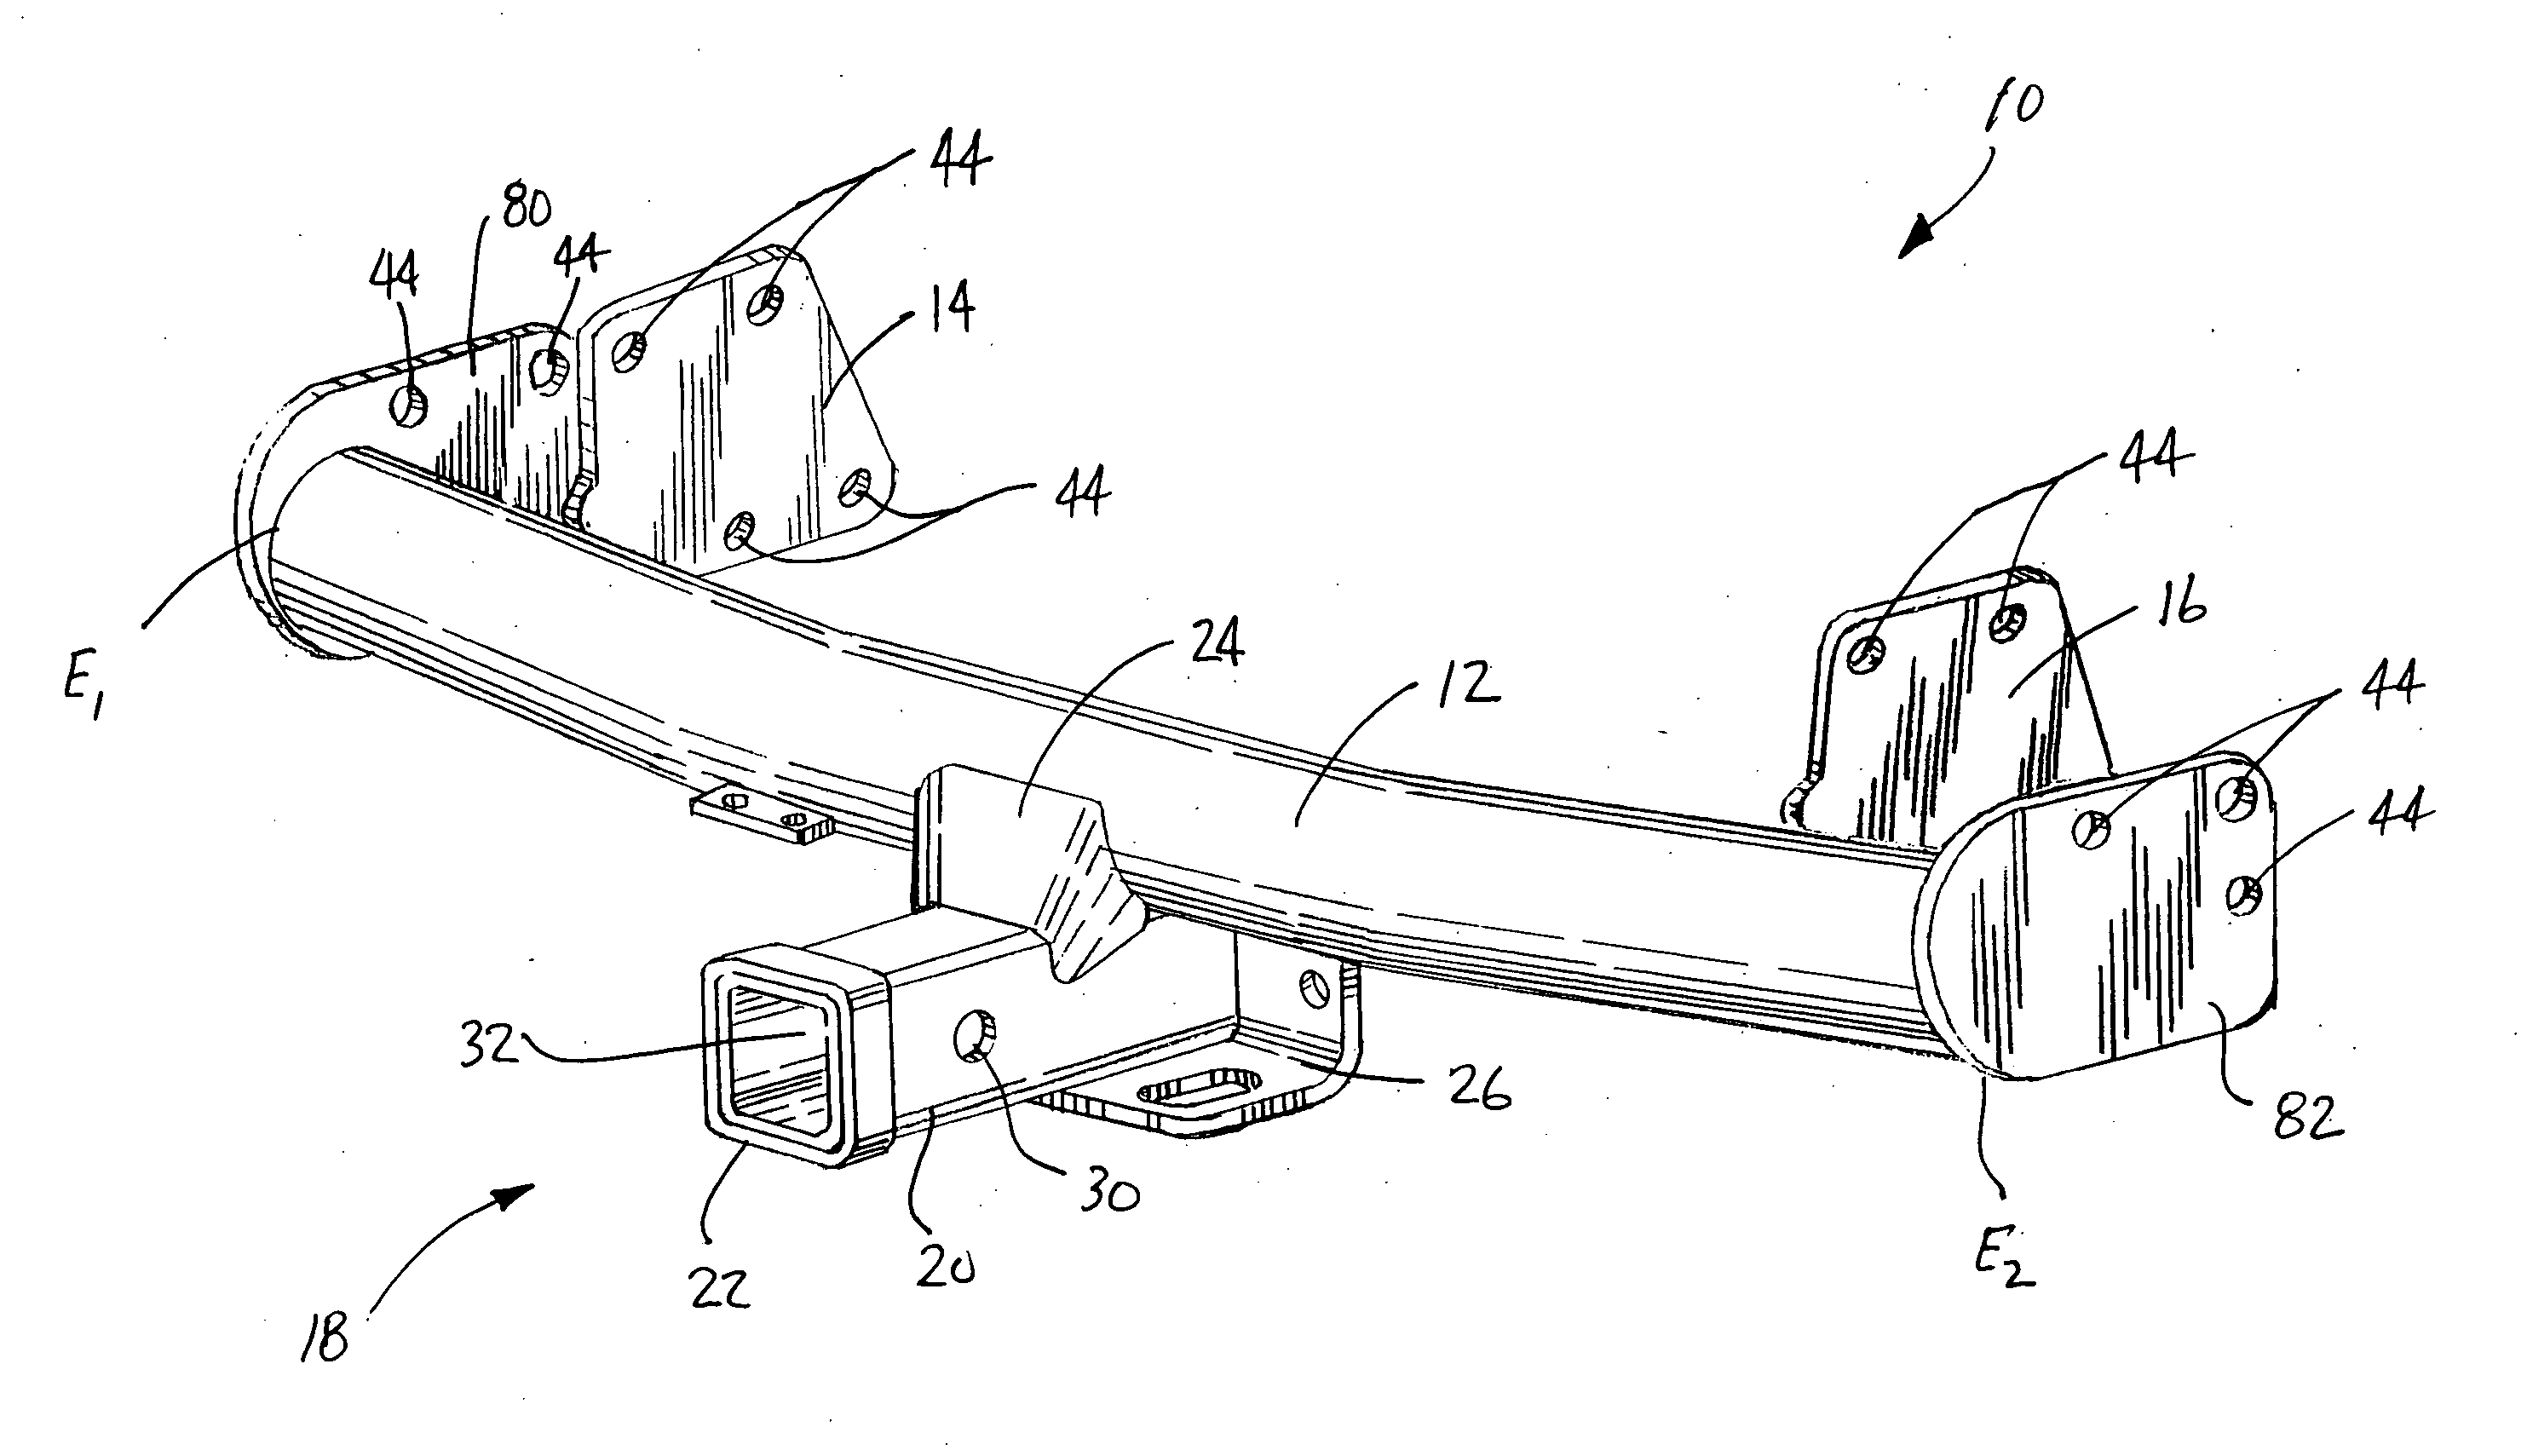 Multi-fit hitch assembly with selectively positionable mounting flanges